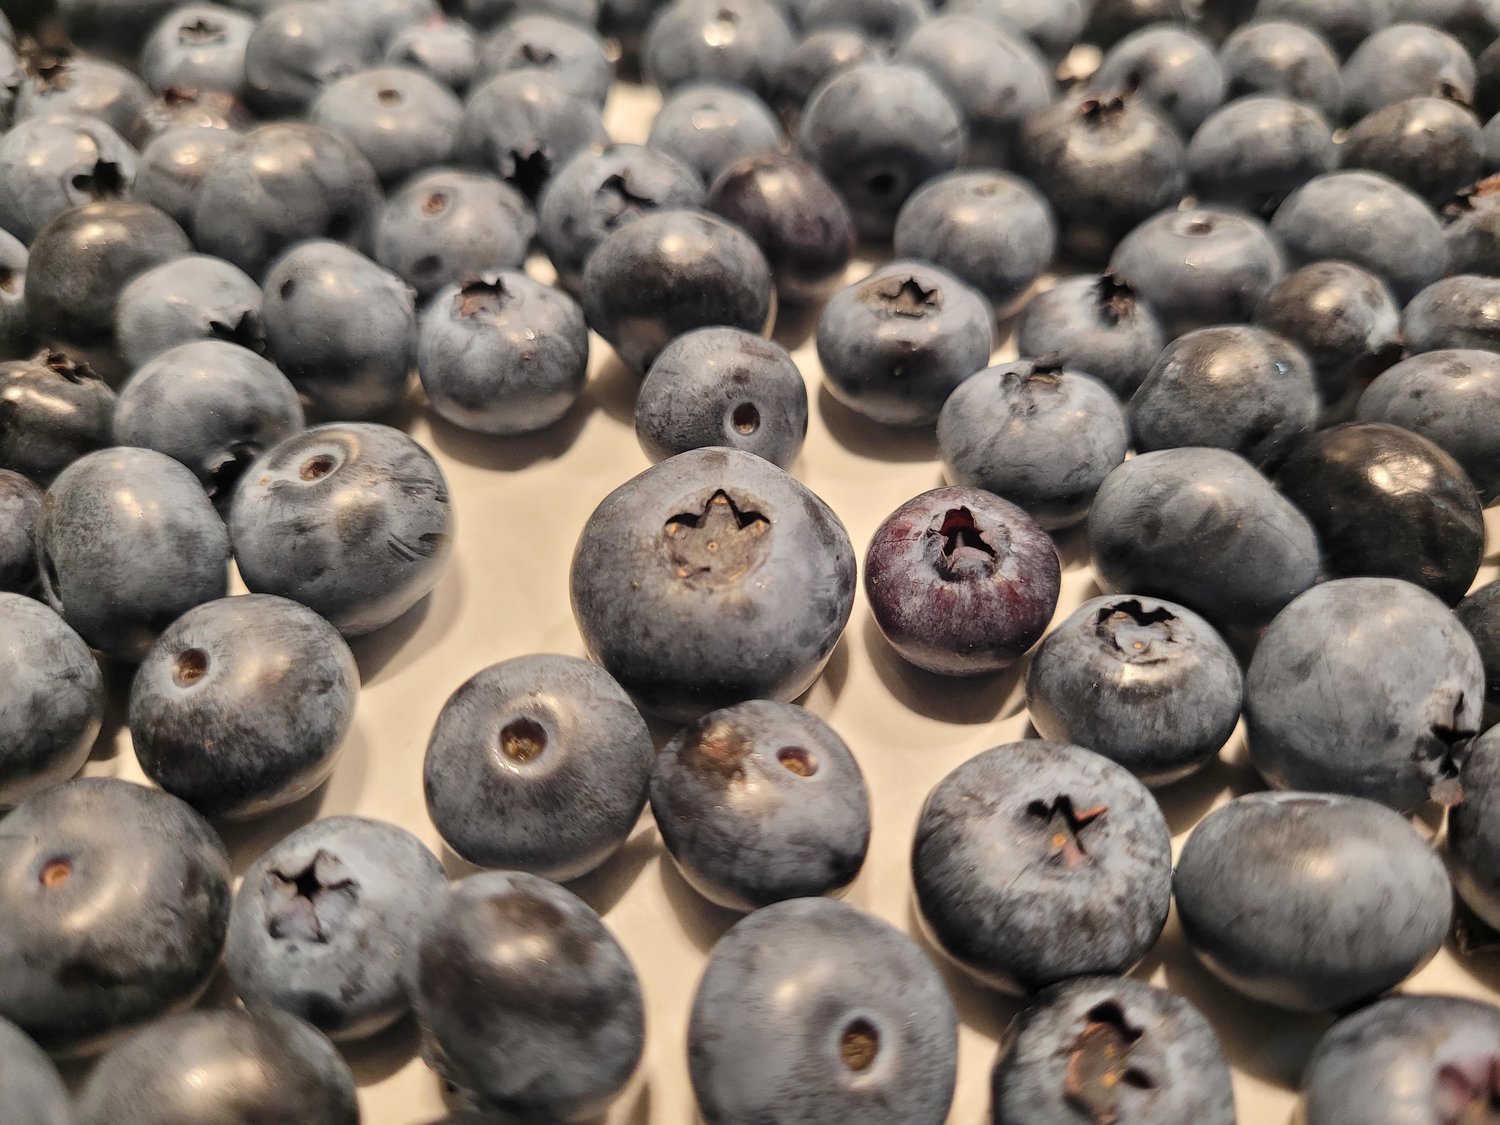 Fresh-picked blueberries have great potential for sweet and delicious treats.